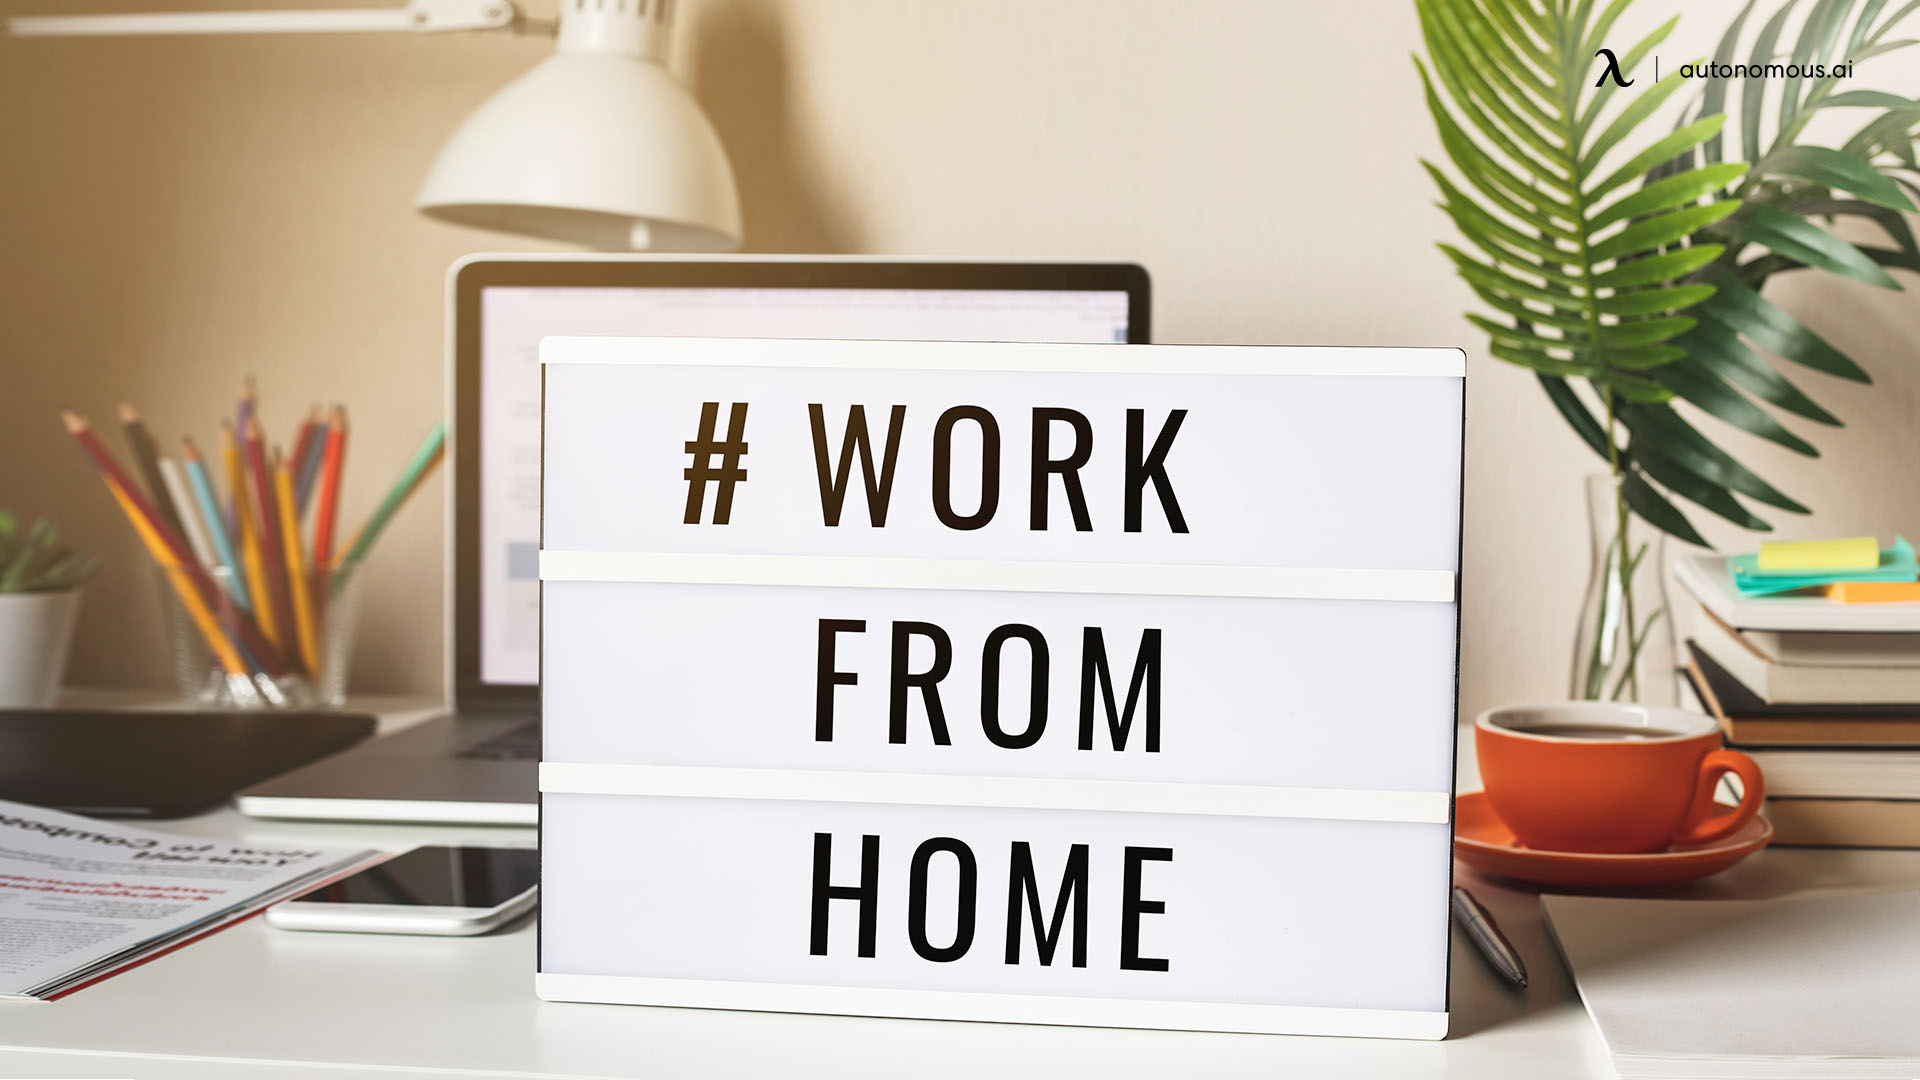 12 Steps to Create an Effective Work from Home Policy